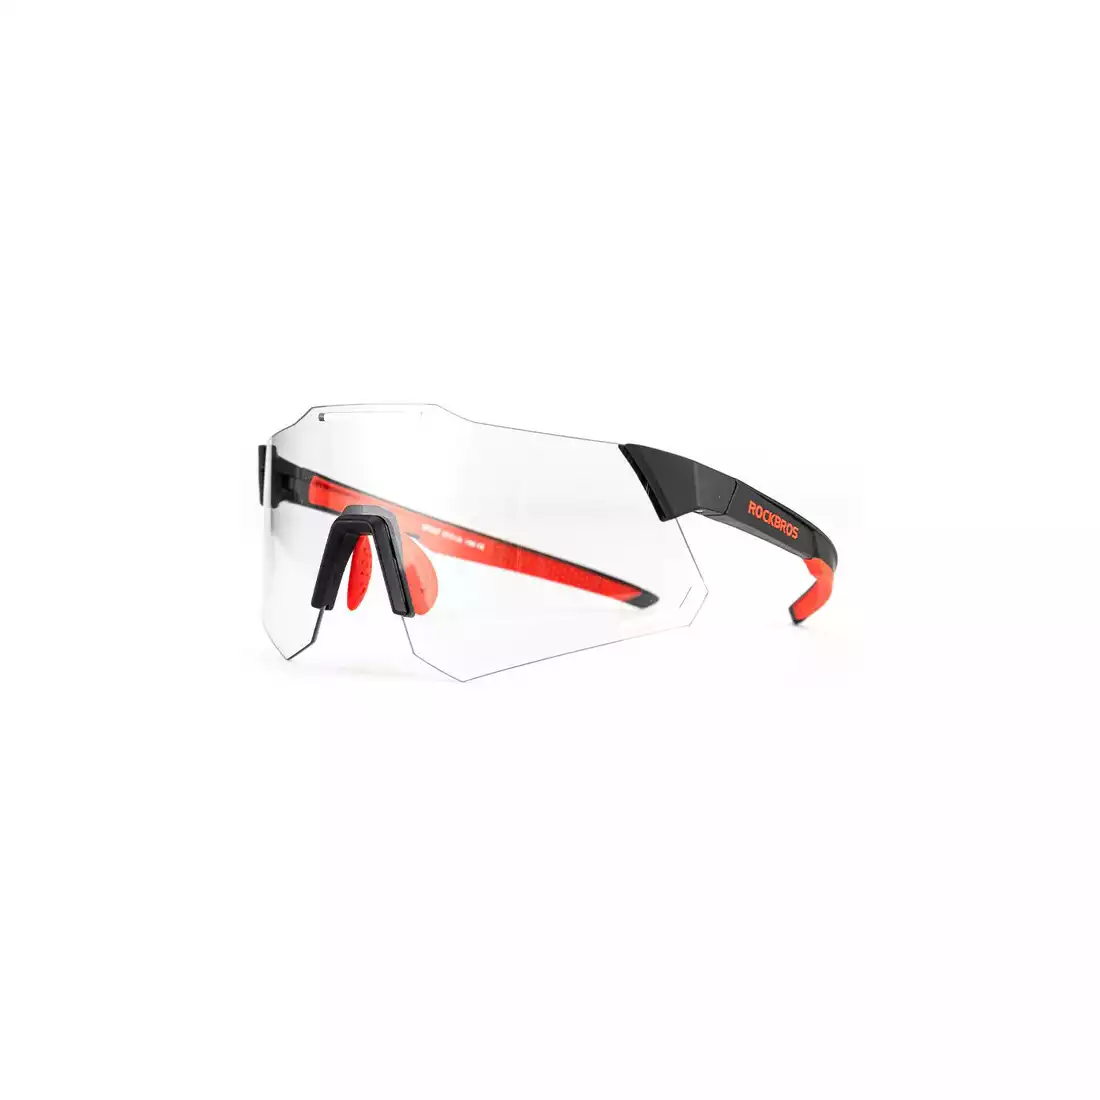 Rockbros 14110001002  sports glasses with photochrome + correction insert black-red